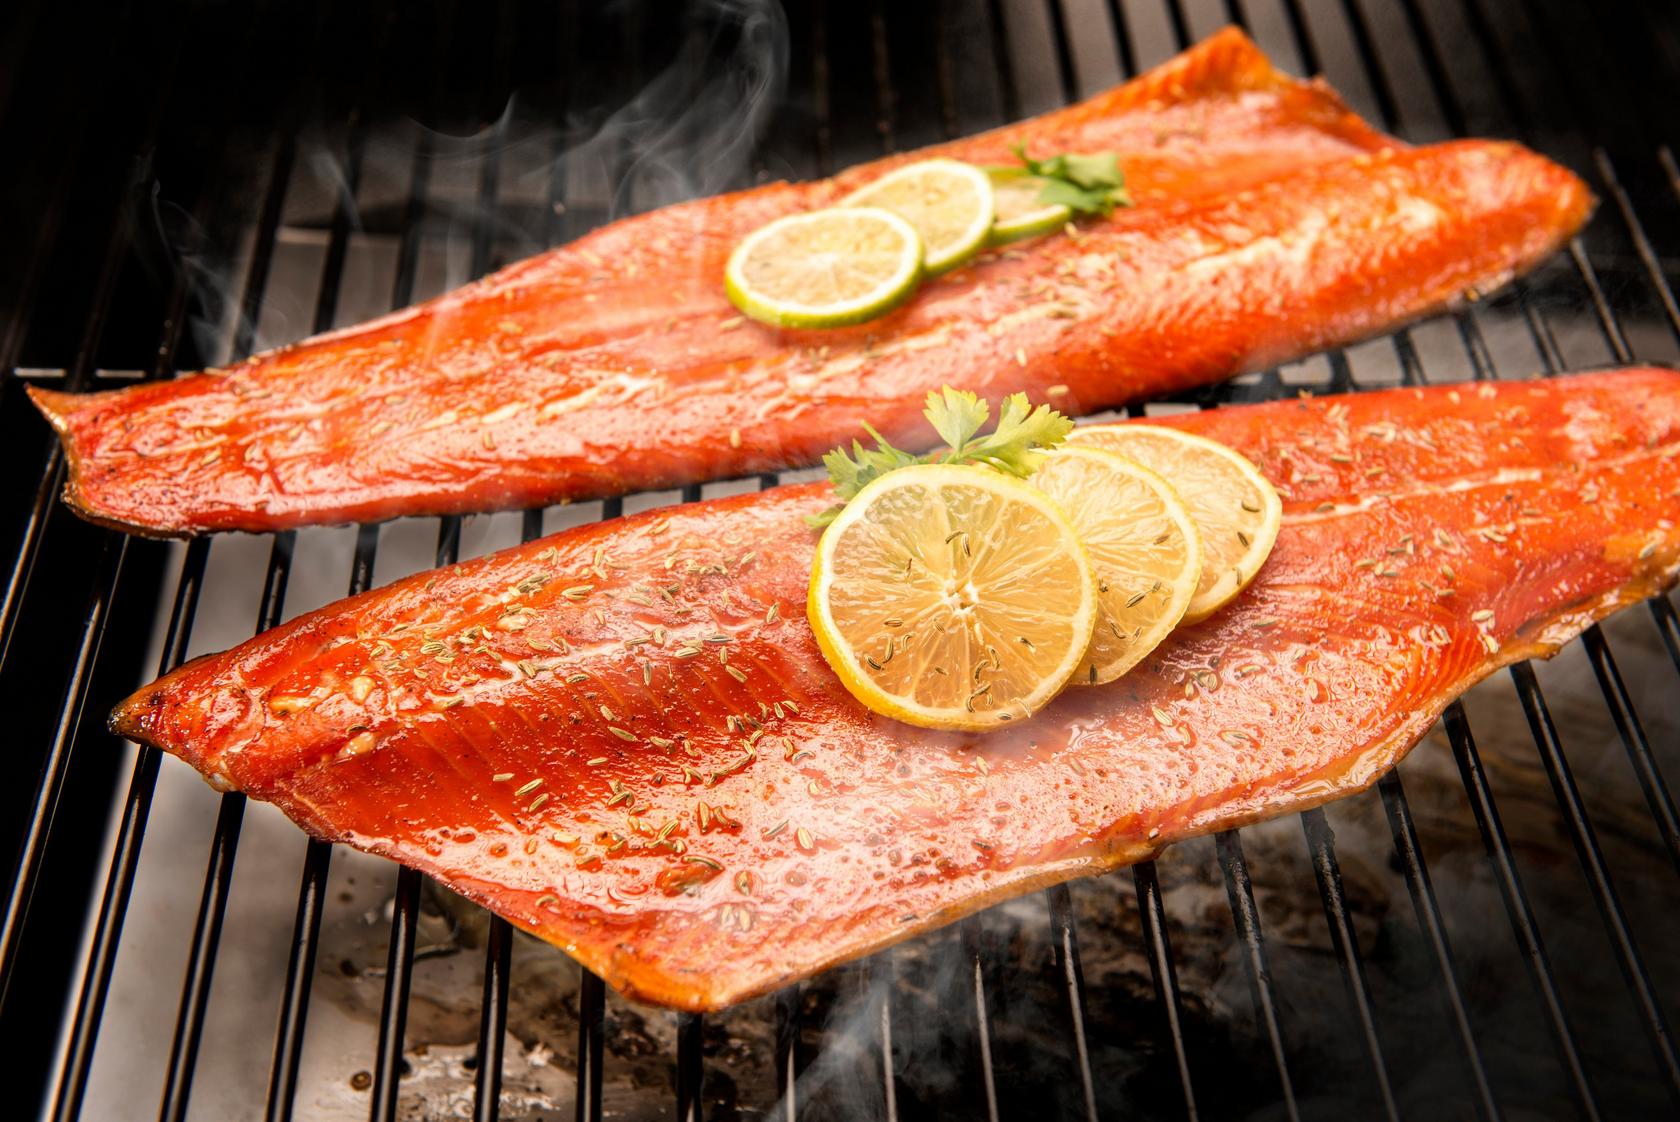 How to Prepare Salmon: What To Buy and How To Cook It